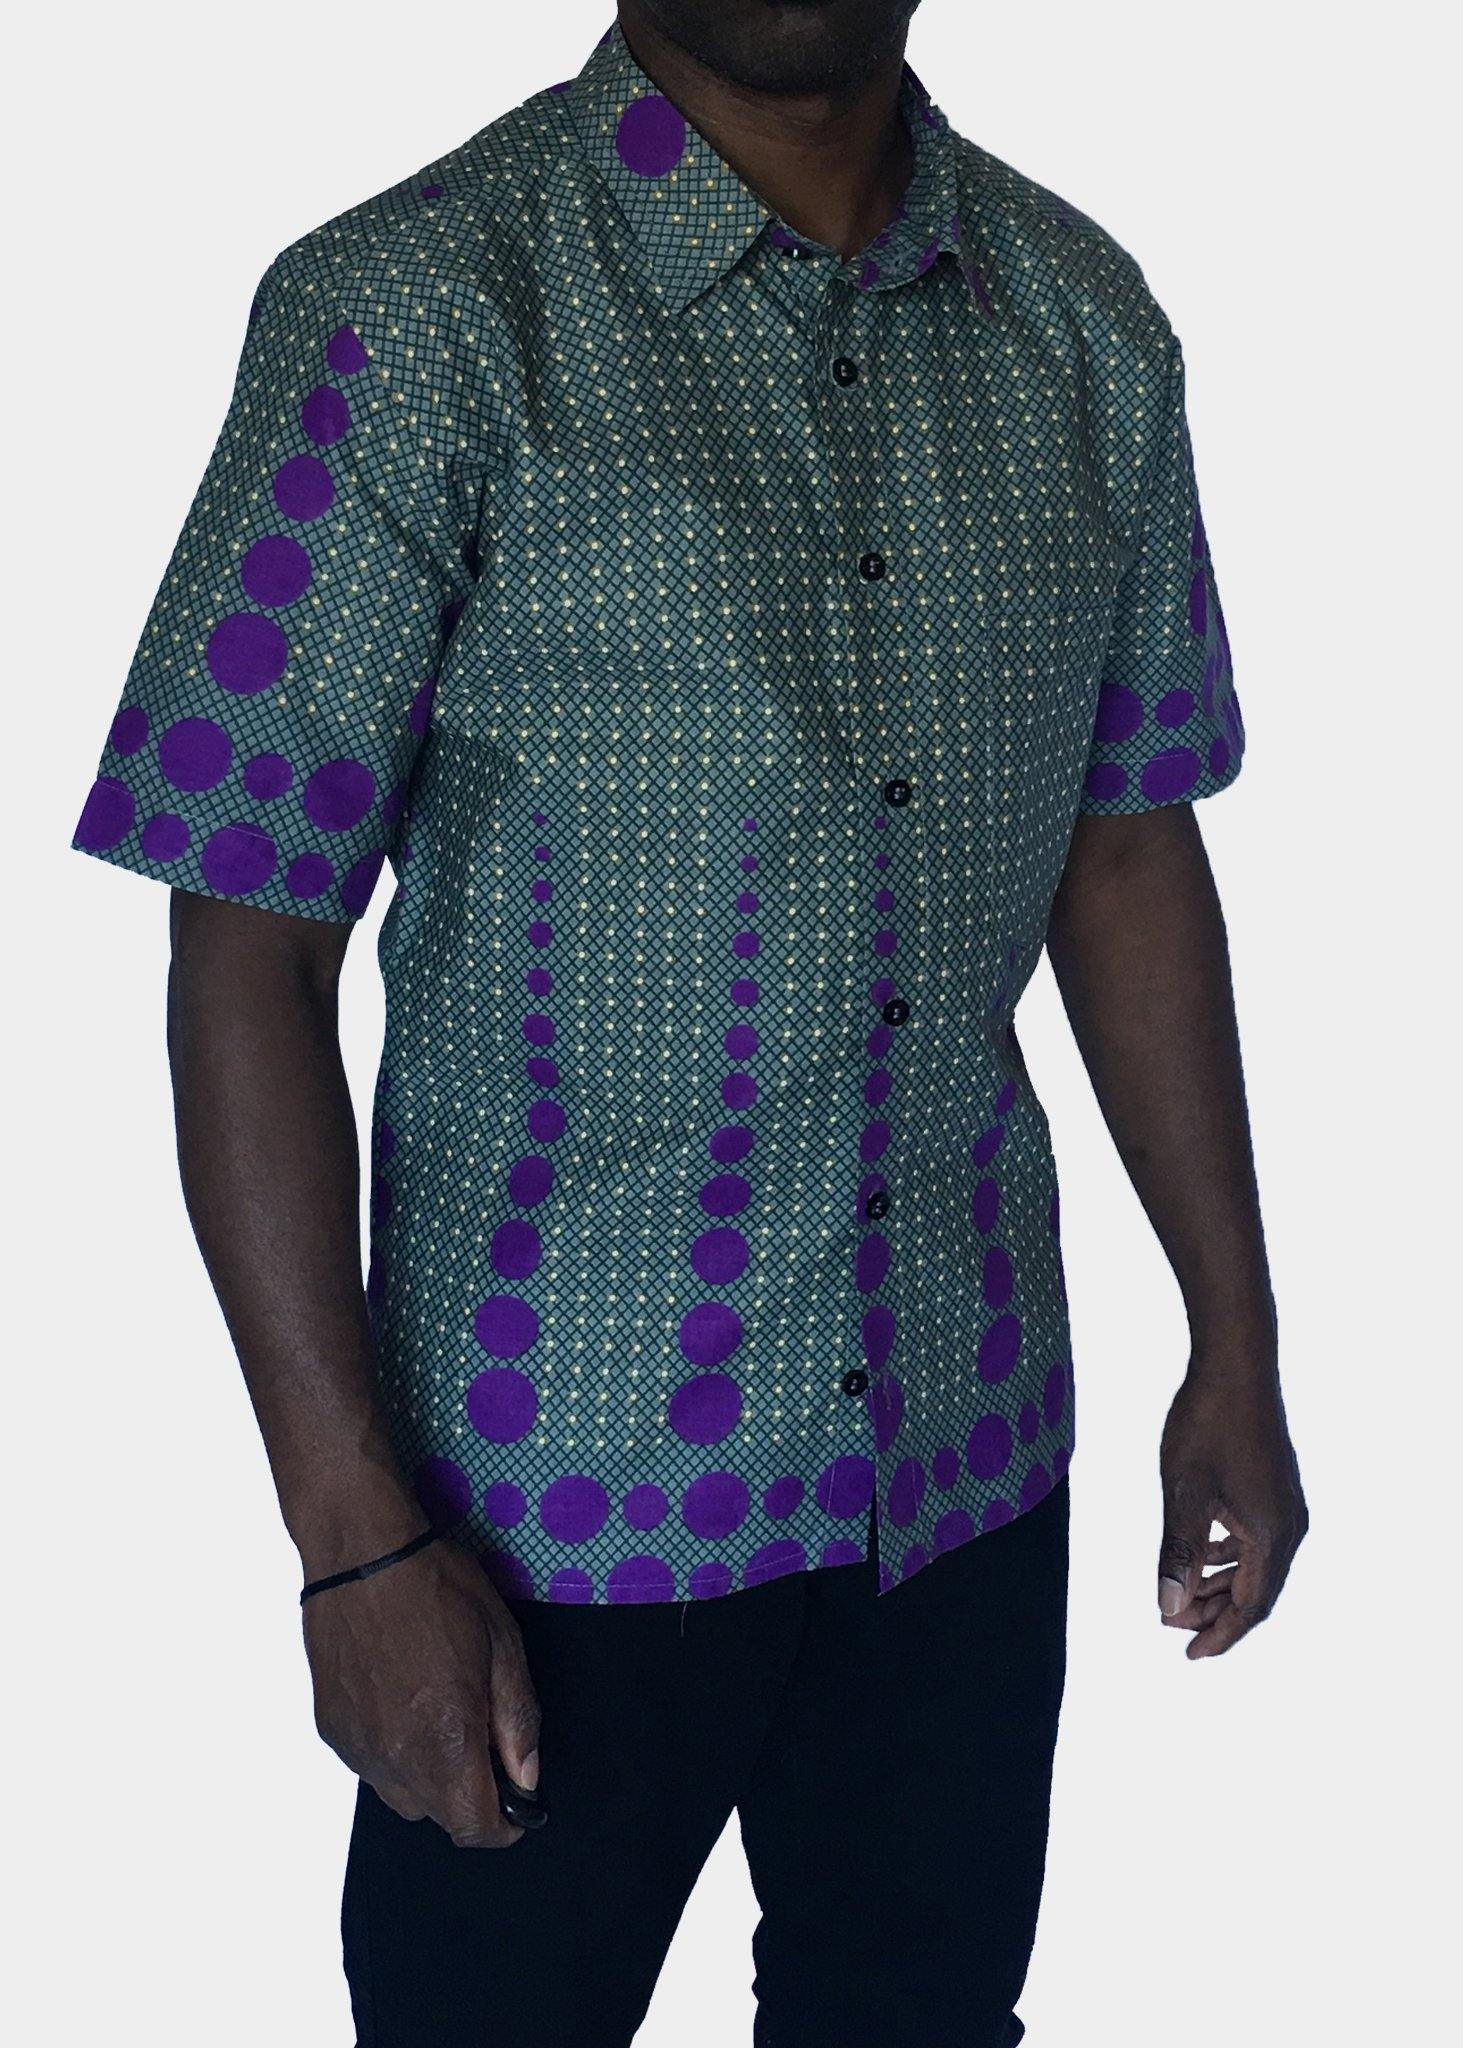 African Print Shirt Fitted Purple Dots Short Sleeves- Contemporary and Colorful Ensemble-African apparel and accessories